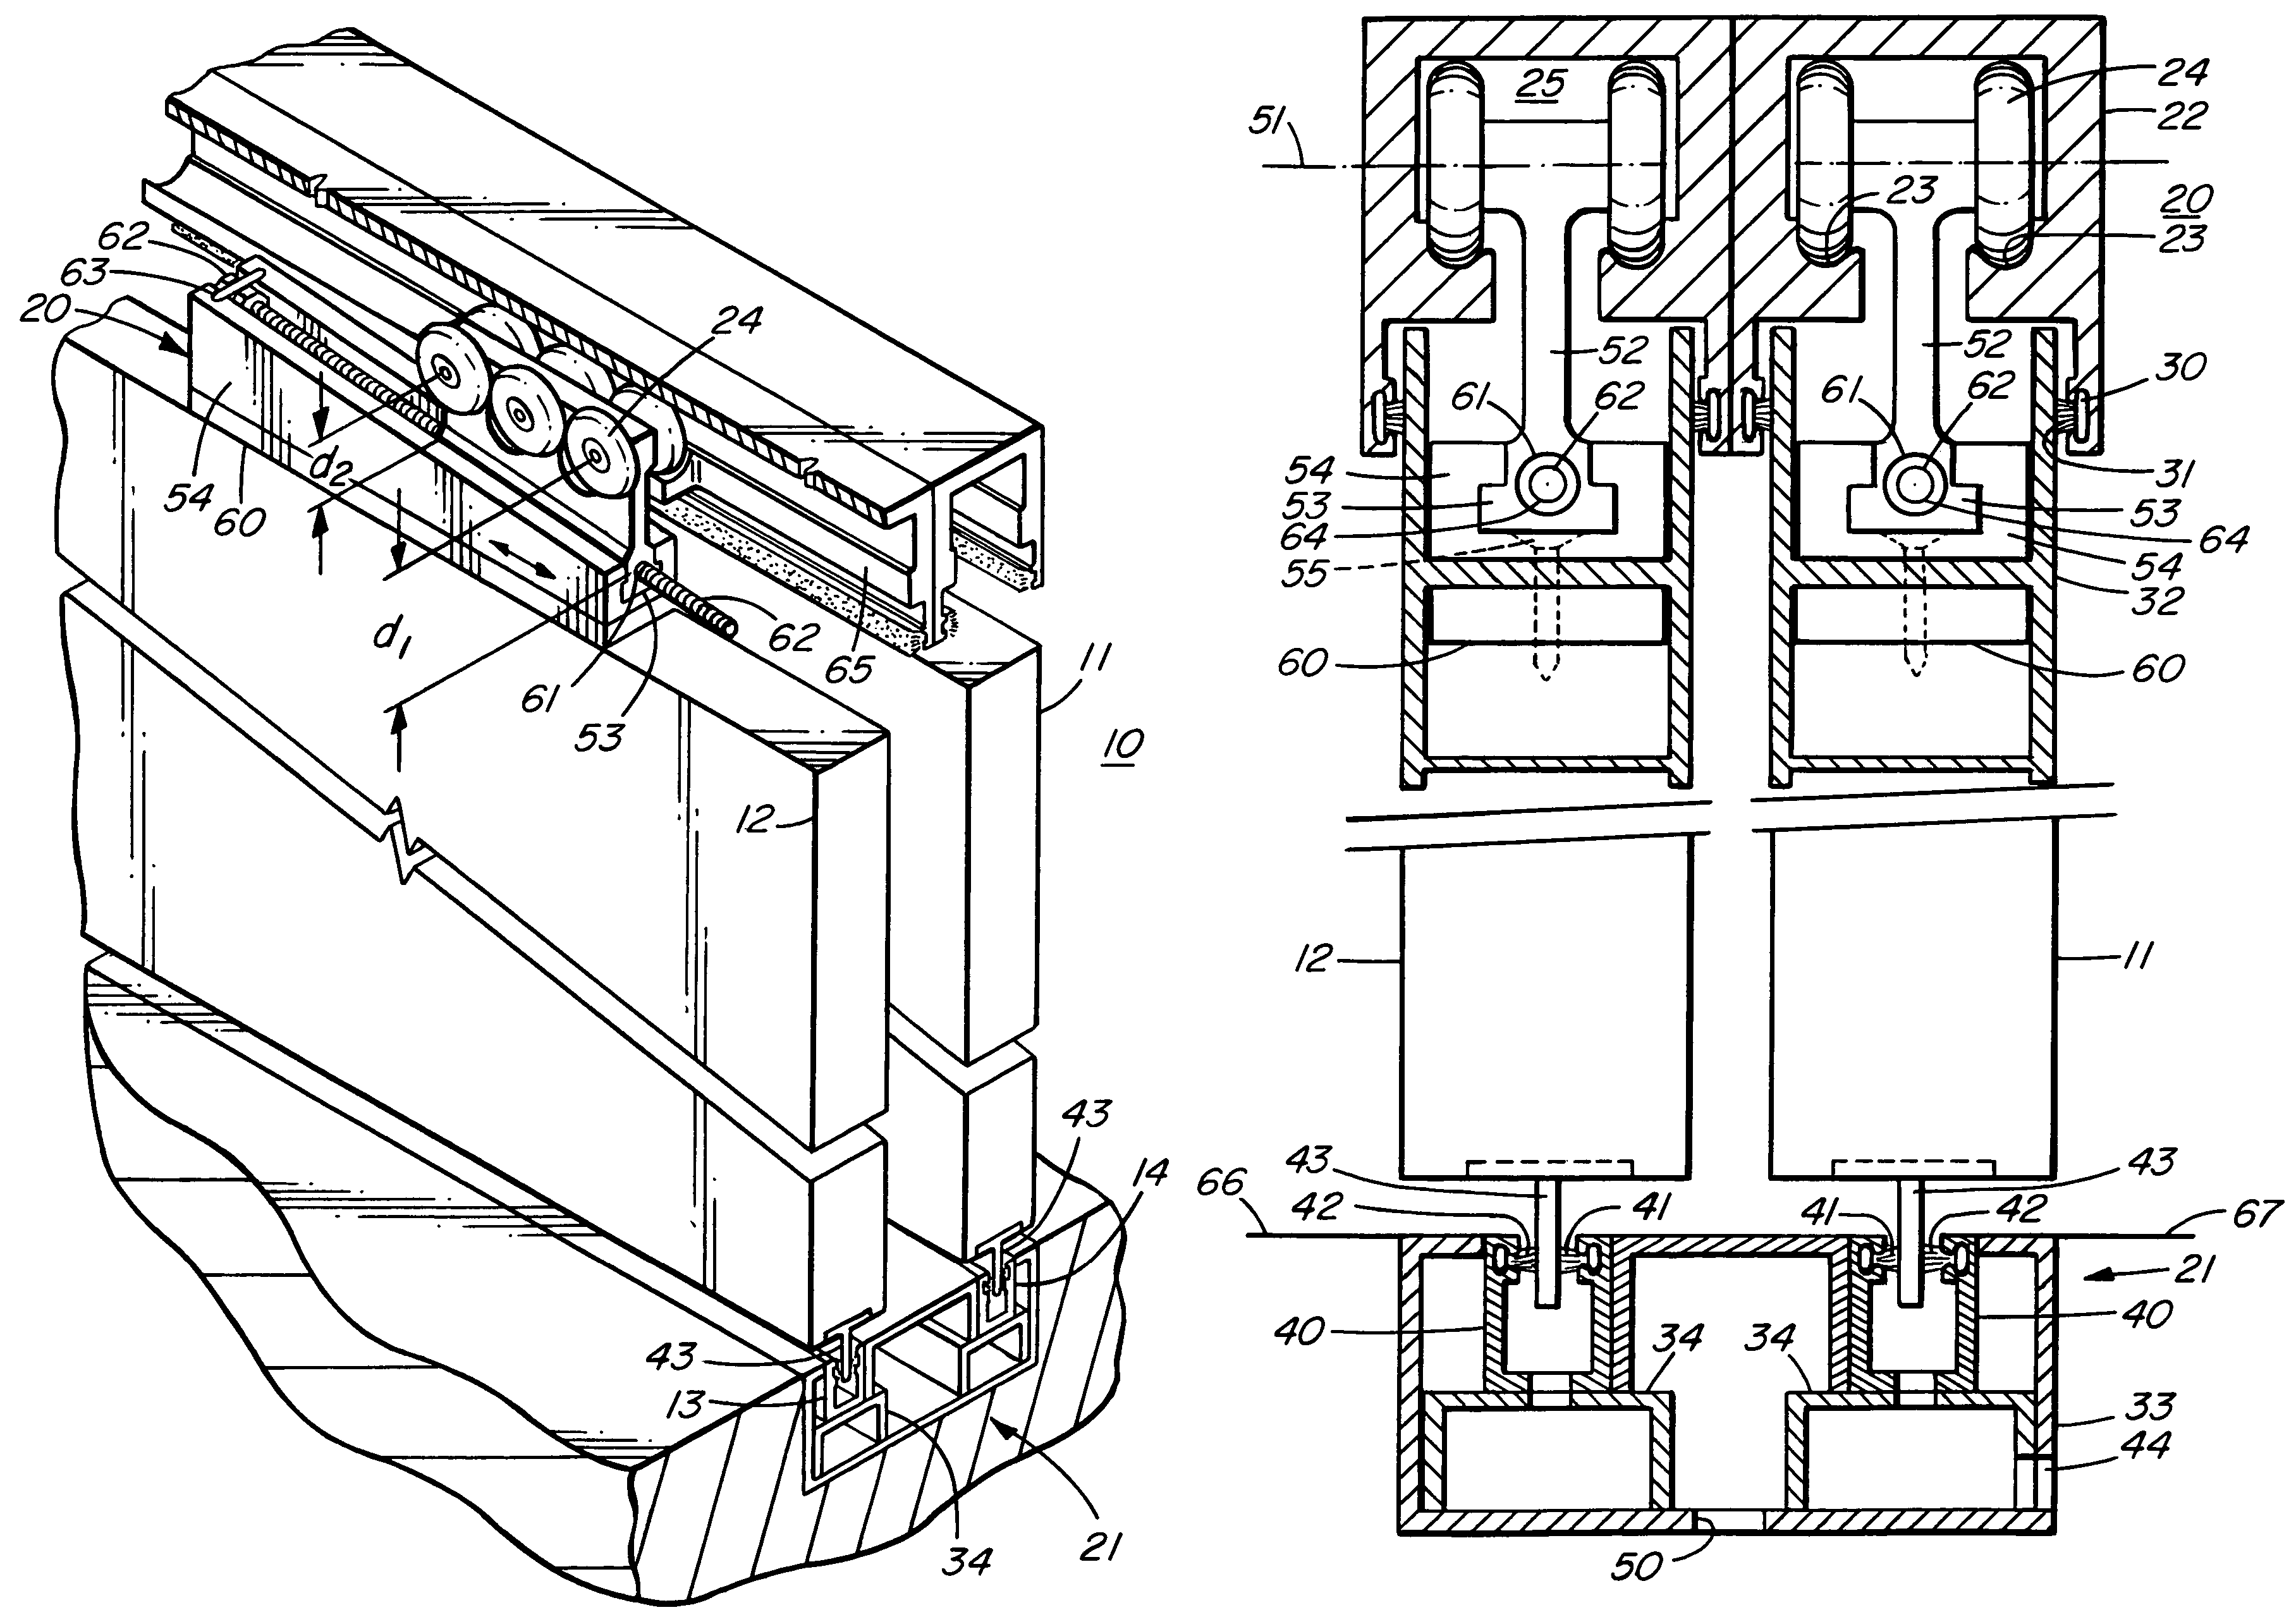 Suspension and sill system for sliding members